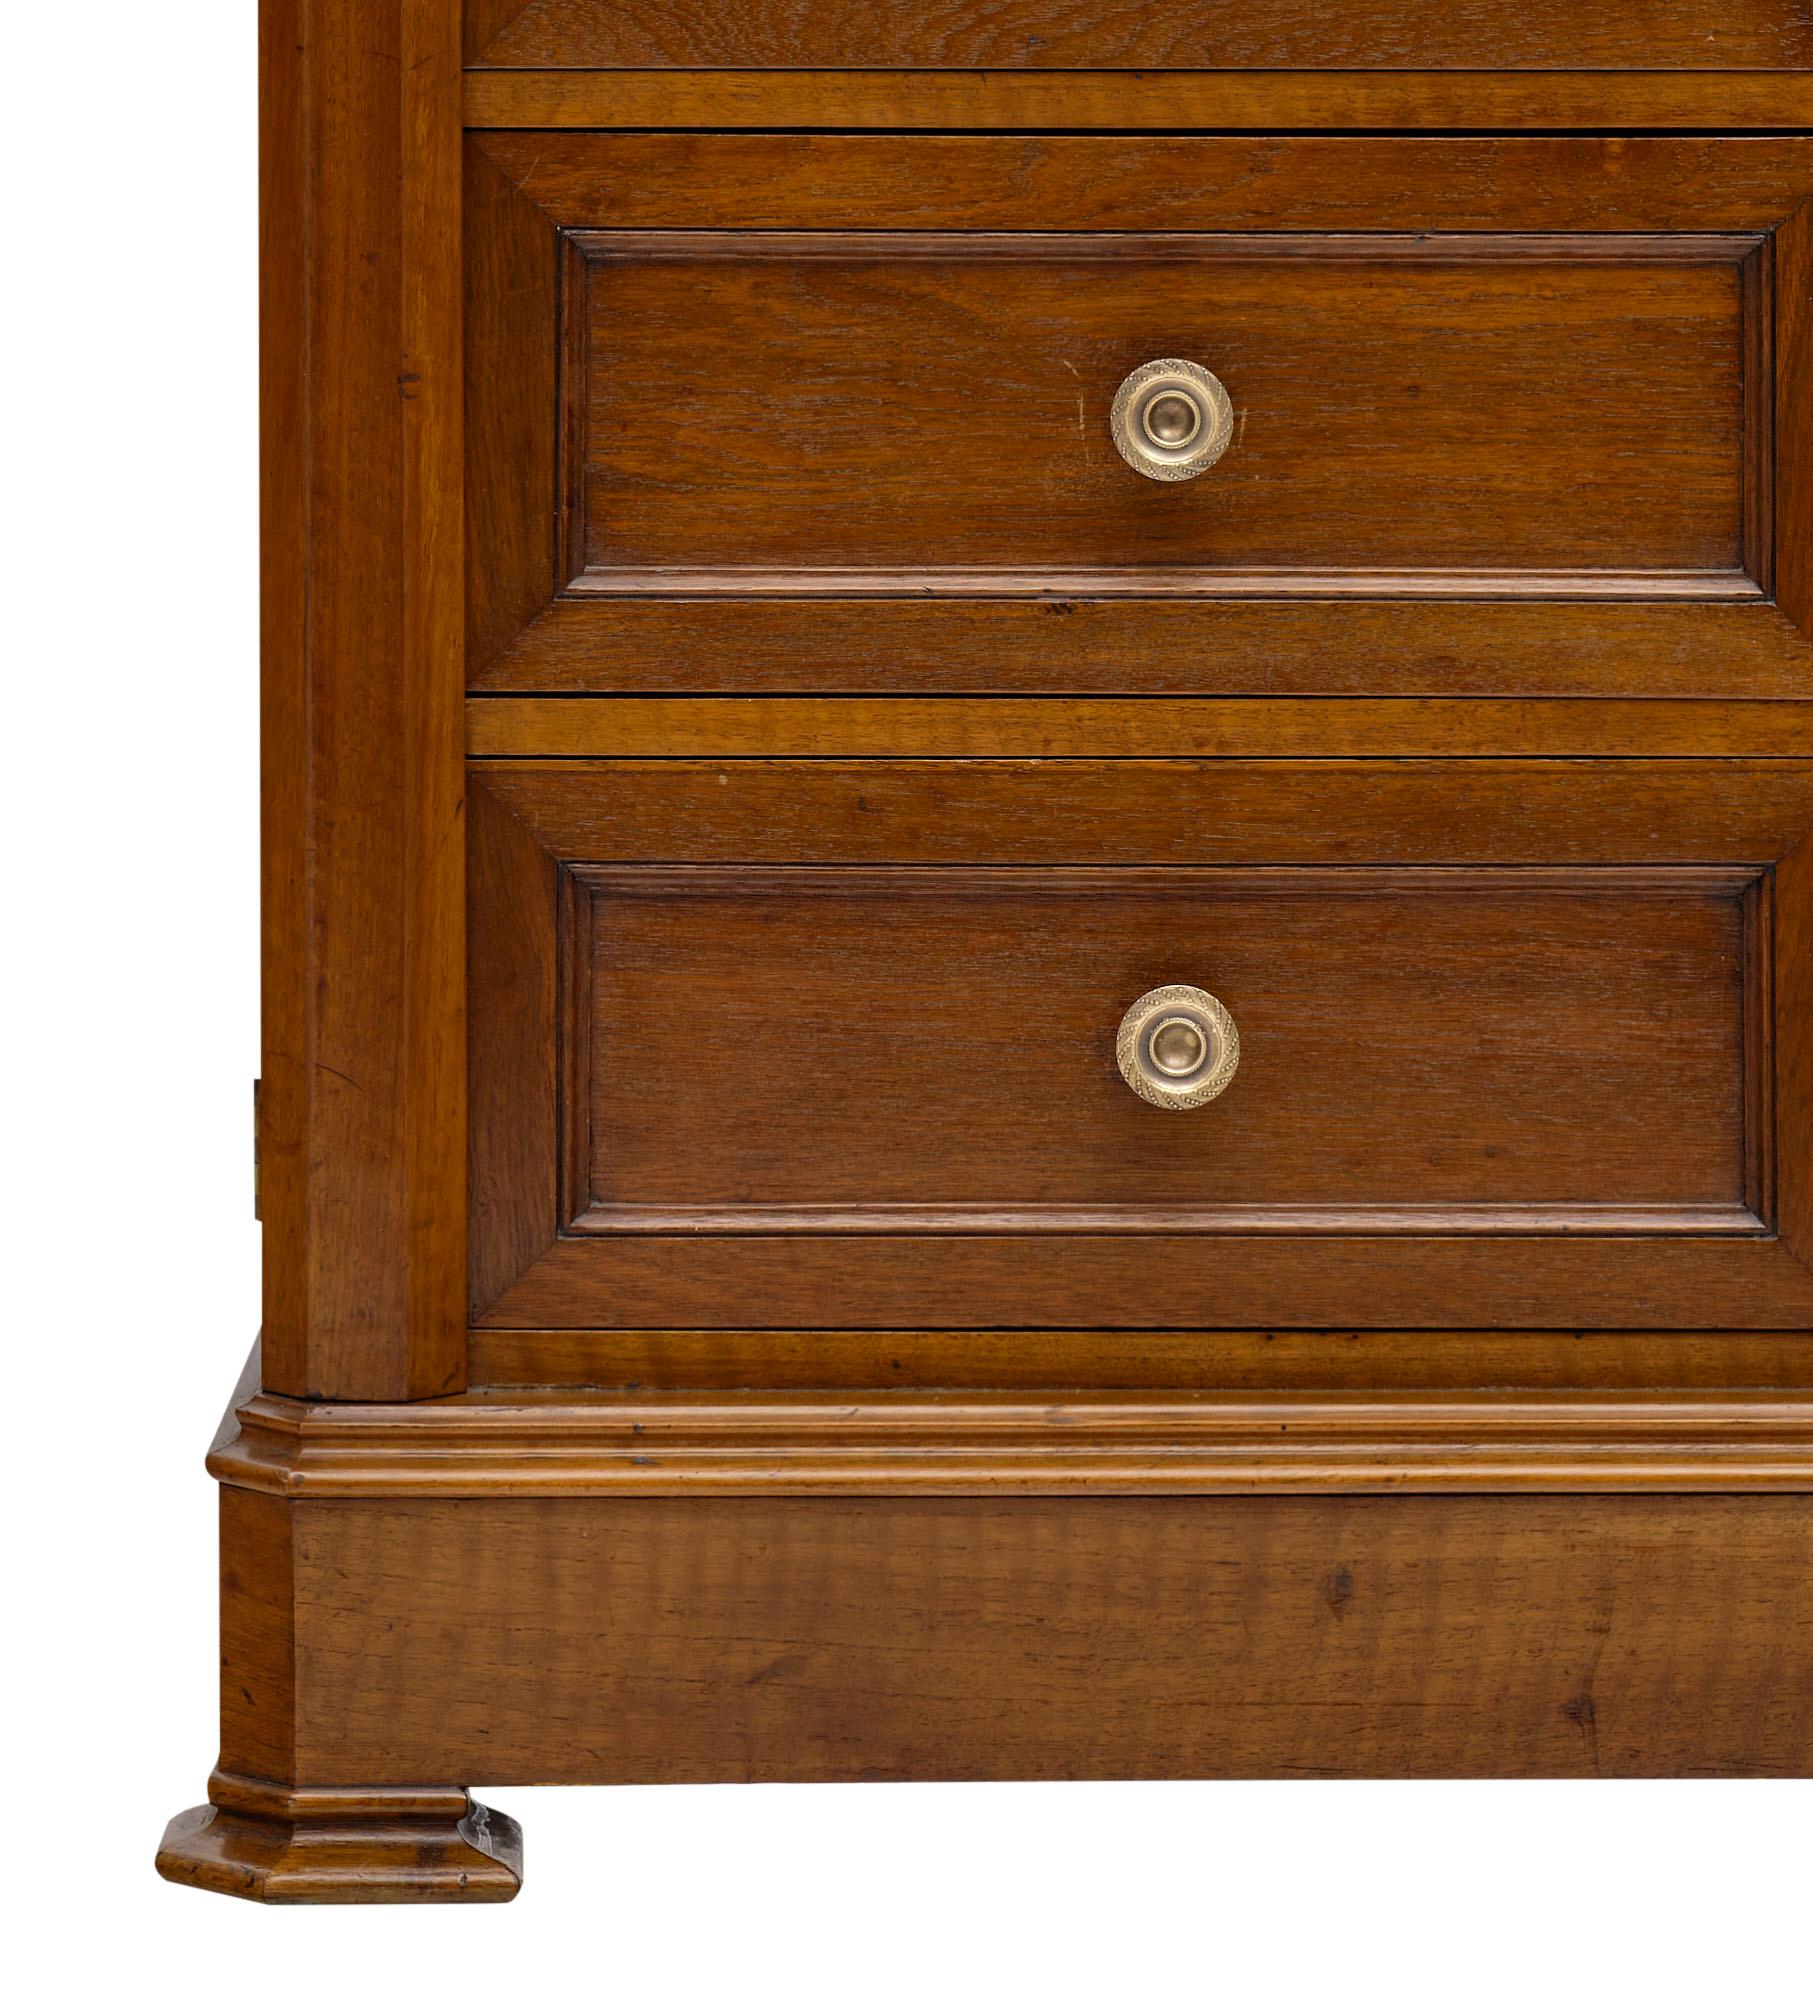 Walnut restauration French “cartonnier” with 16 dovetailed drawers featuring finely cast hardware. The cabinet provides “traverses” on both sides.